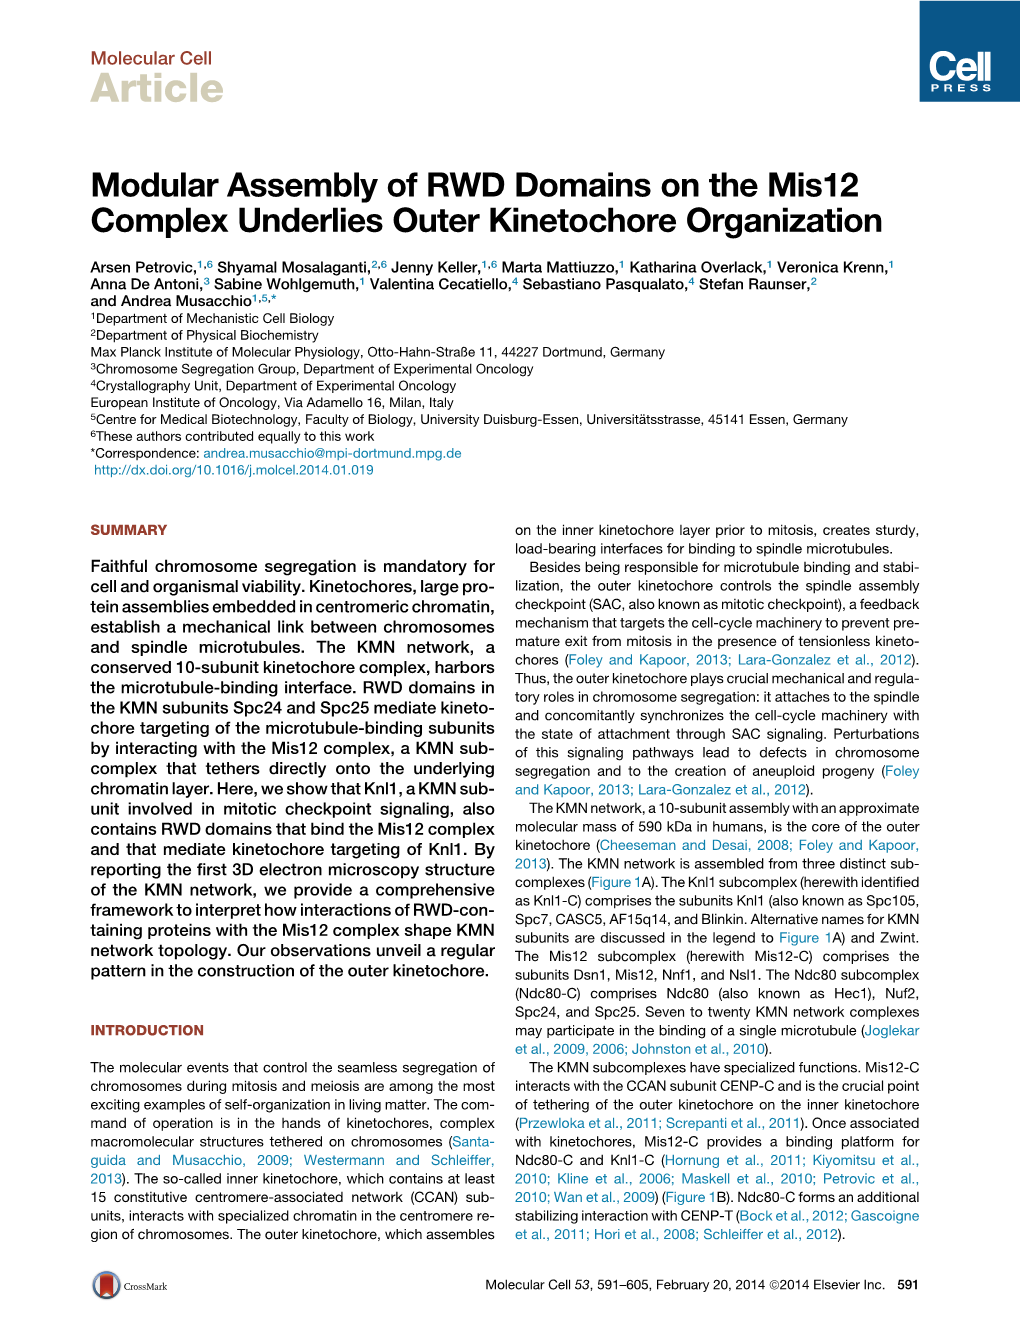 Modular Assembly of RWD Domains on the Mis12 Complex Underlies Outer Kinetochore Organization